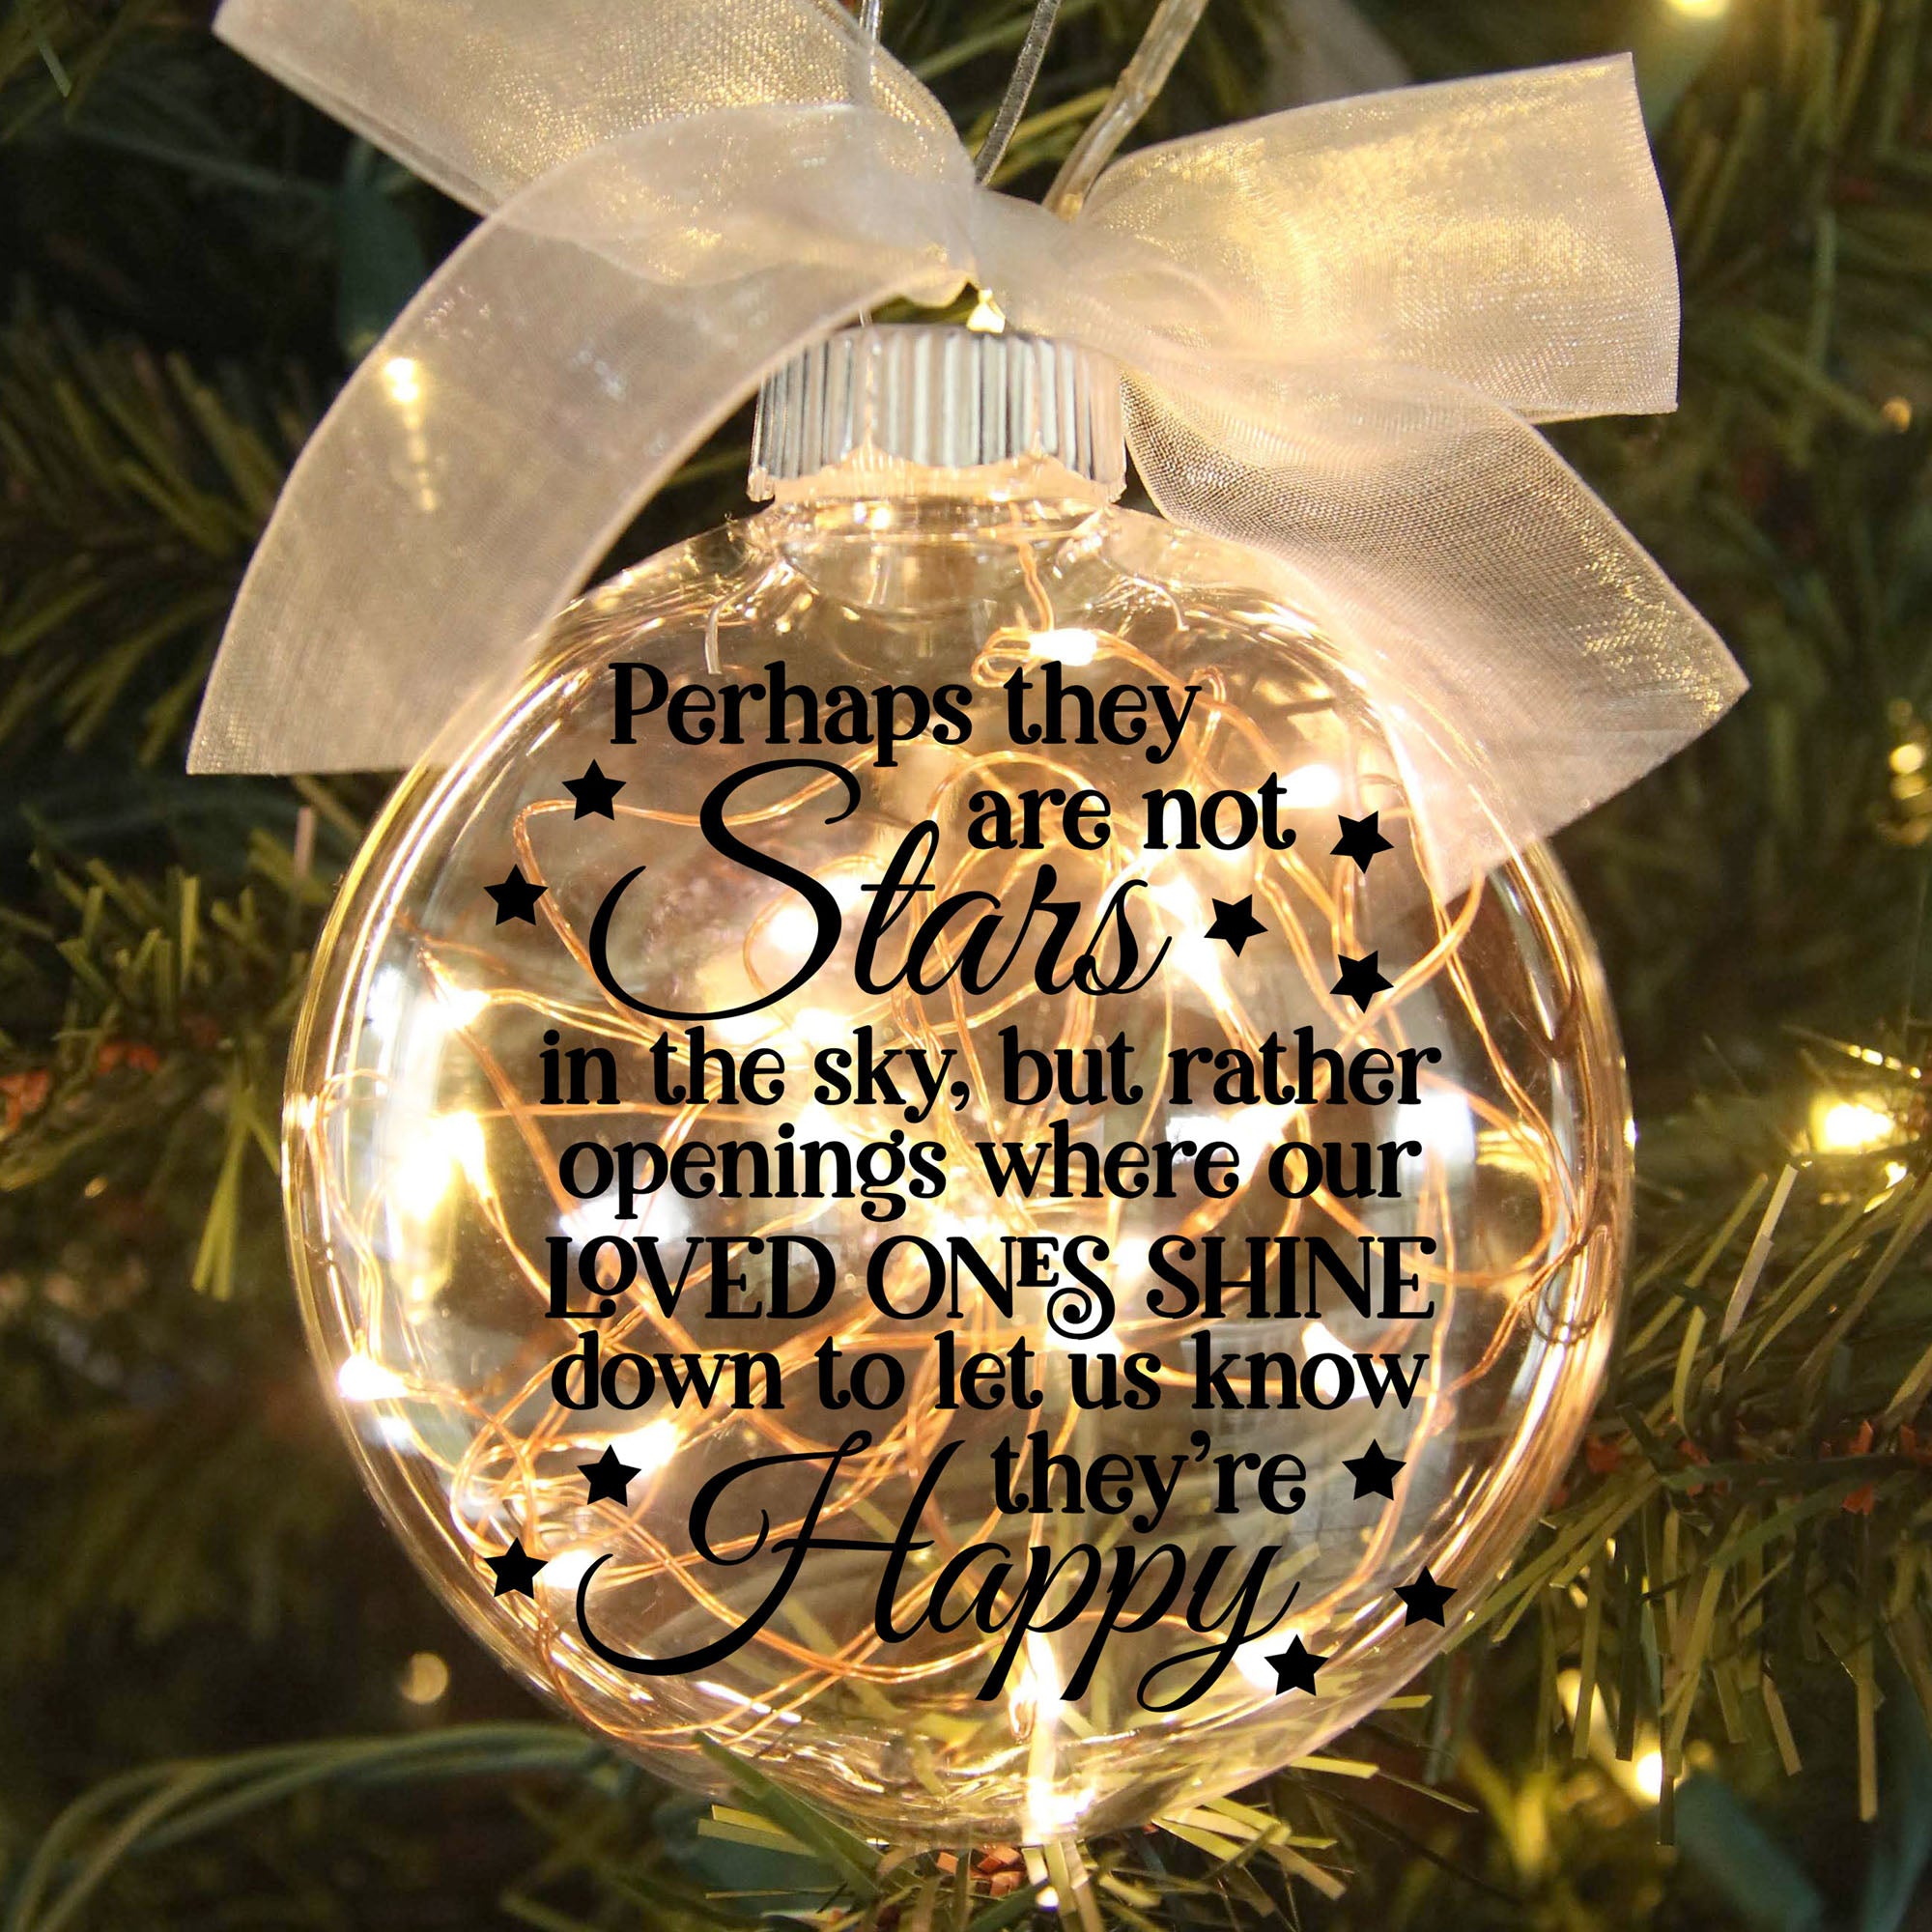 Sympathy Stars in the Sky Lighted Christmas Ornament